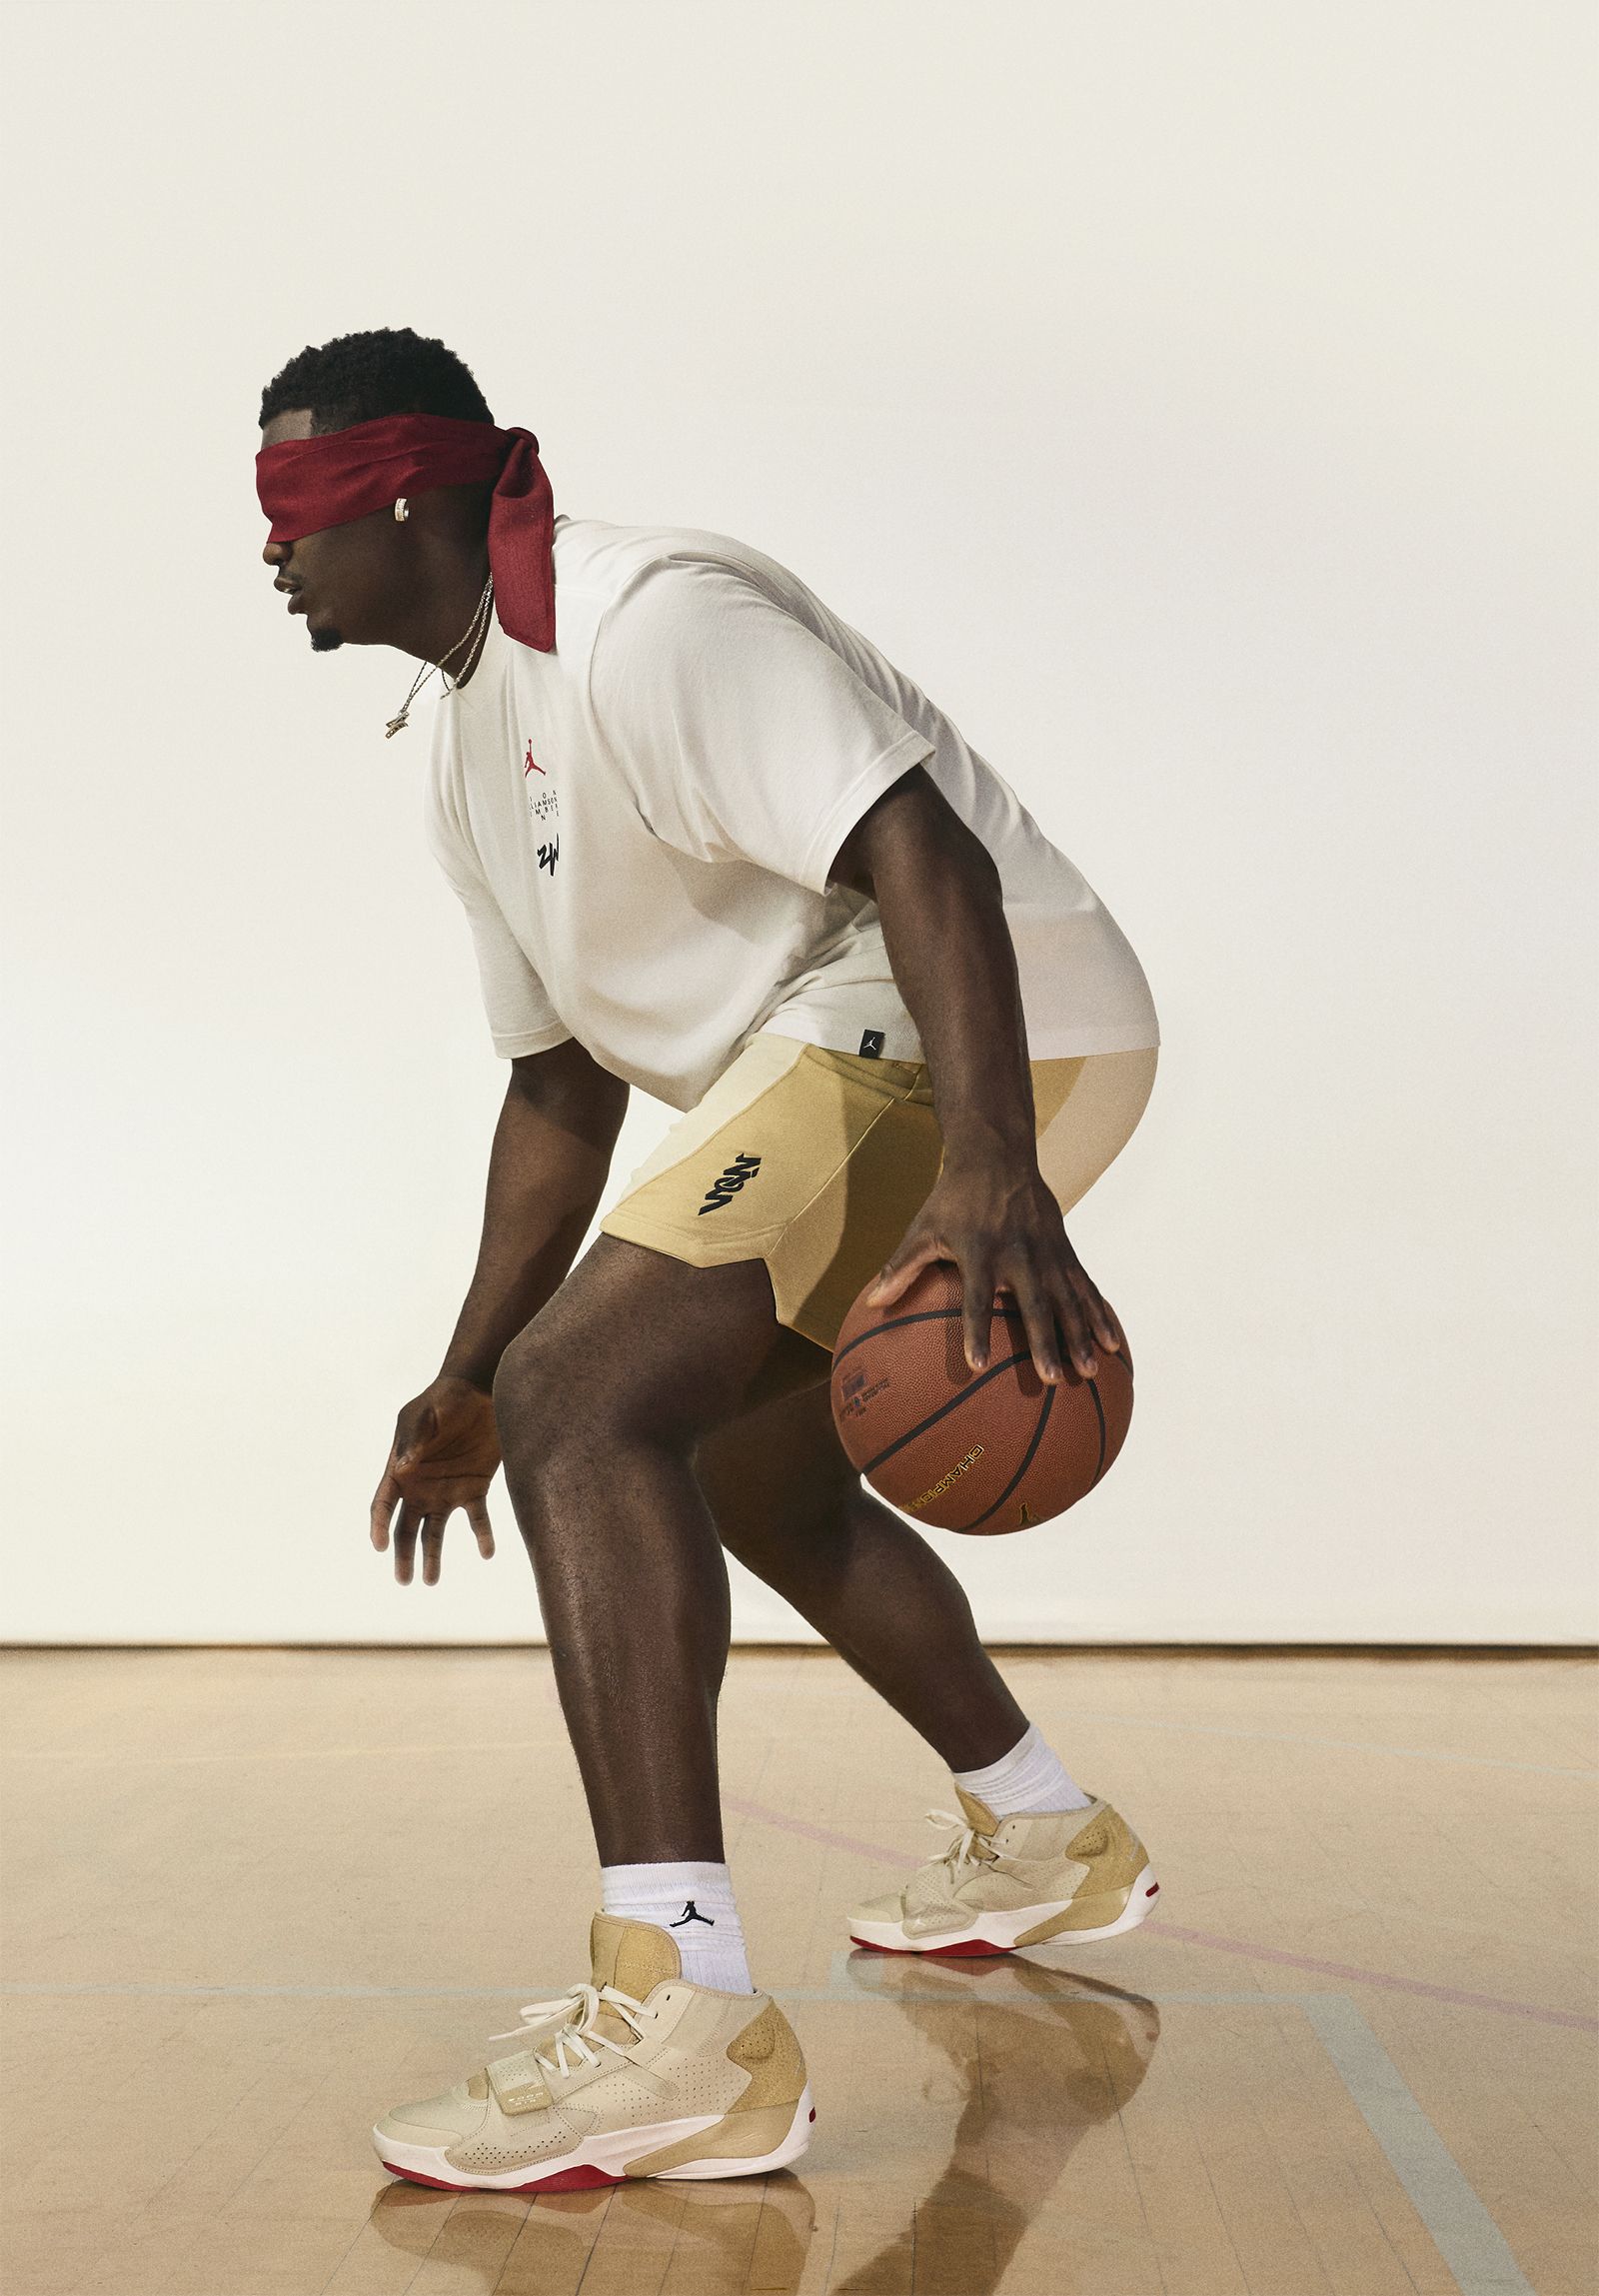 Side view of Zion Williamson dribbling basketball with blindfold on. He is wearing Nike Zion 2 sneakers